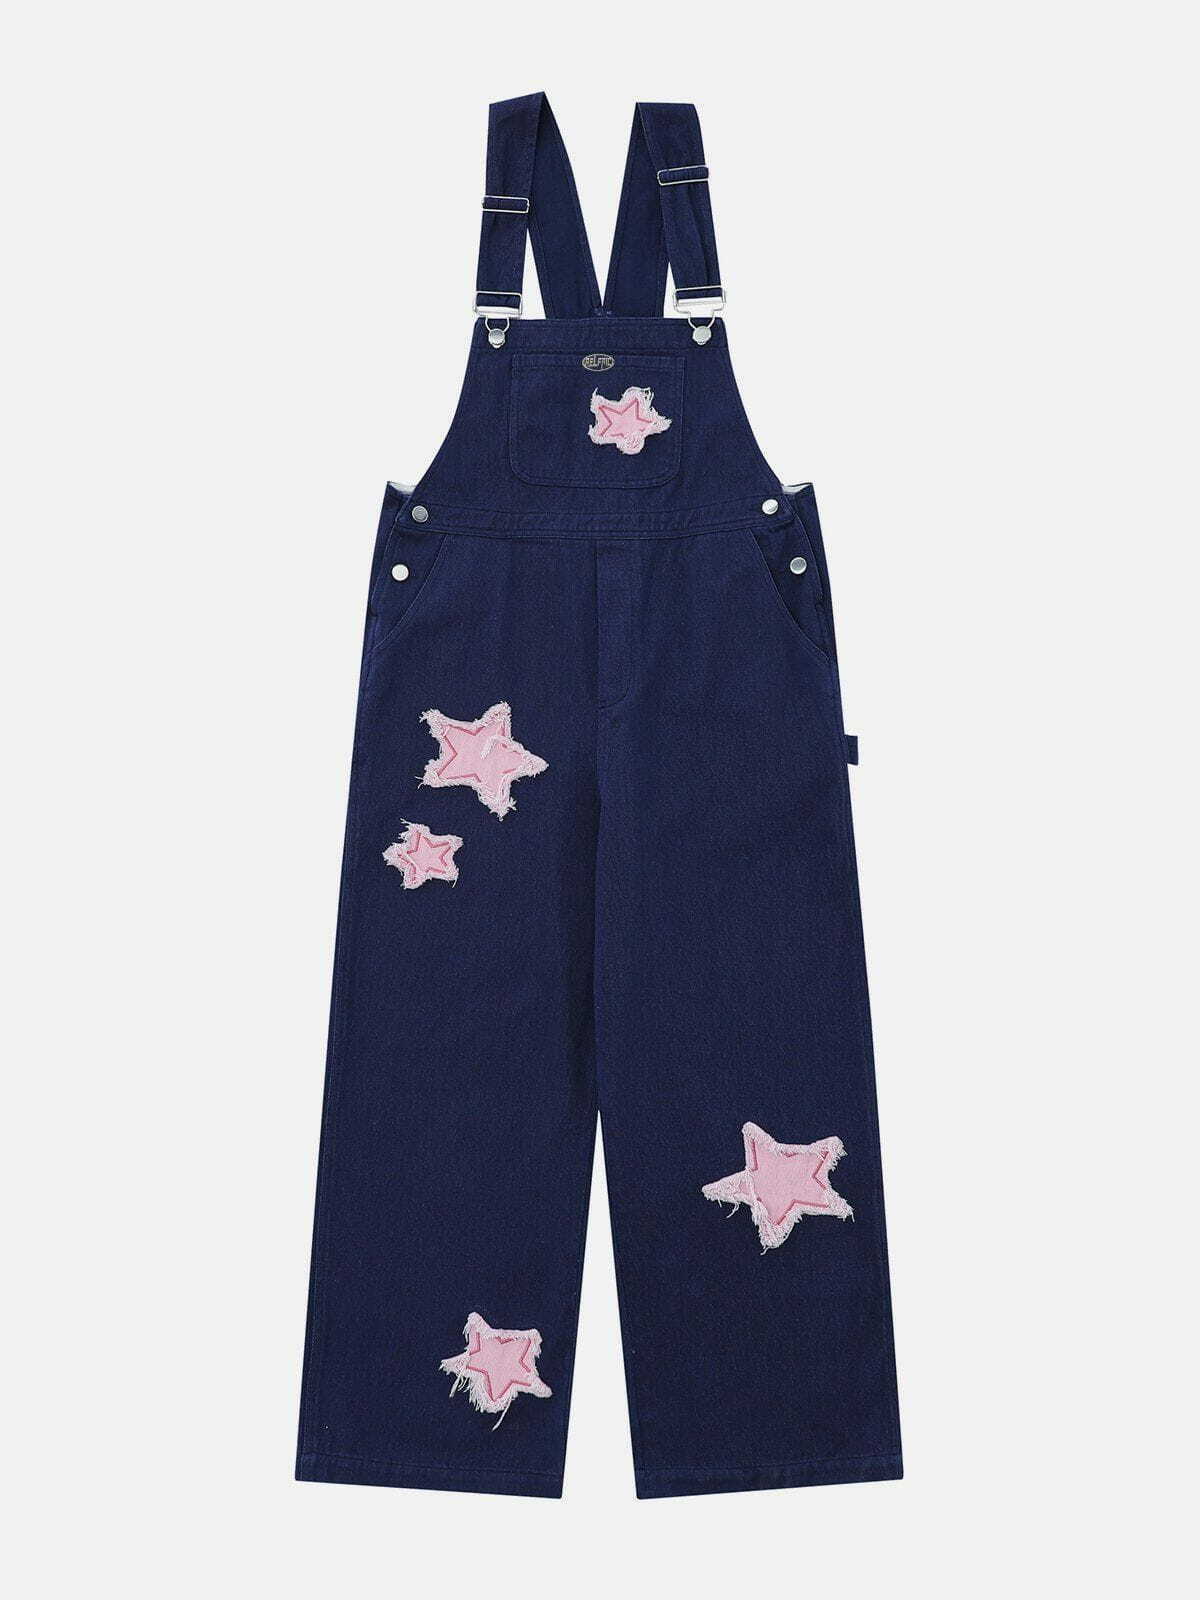 vibrant star embroidered overalls   y2k streetwear 7580